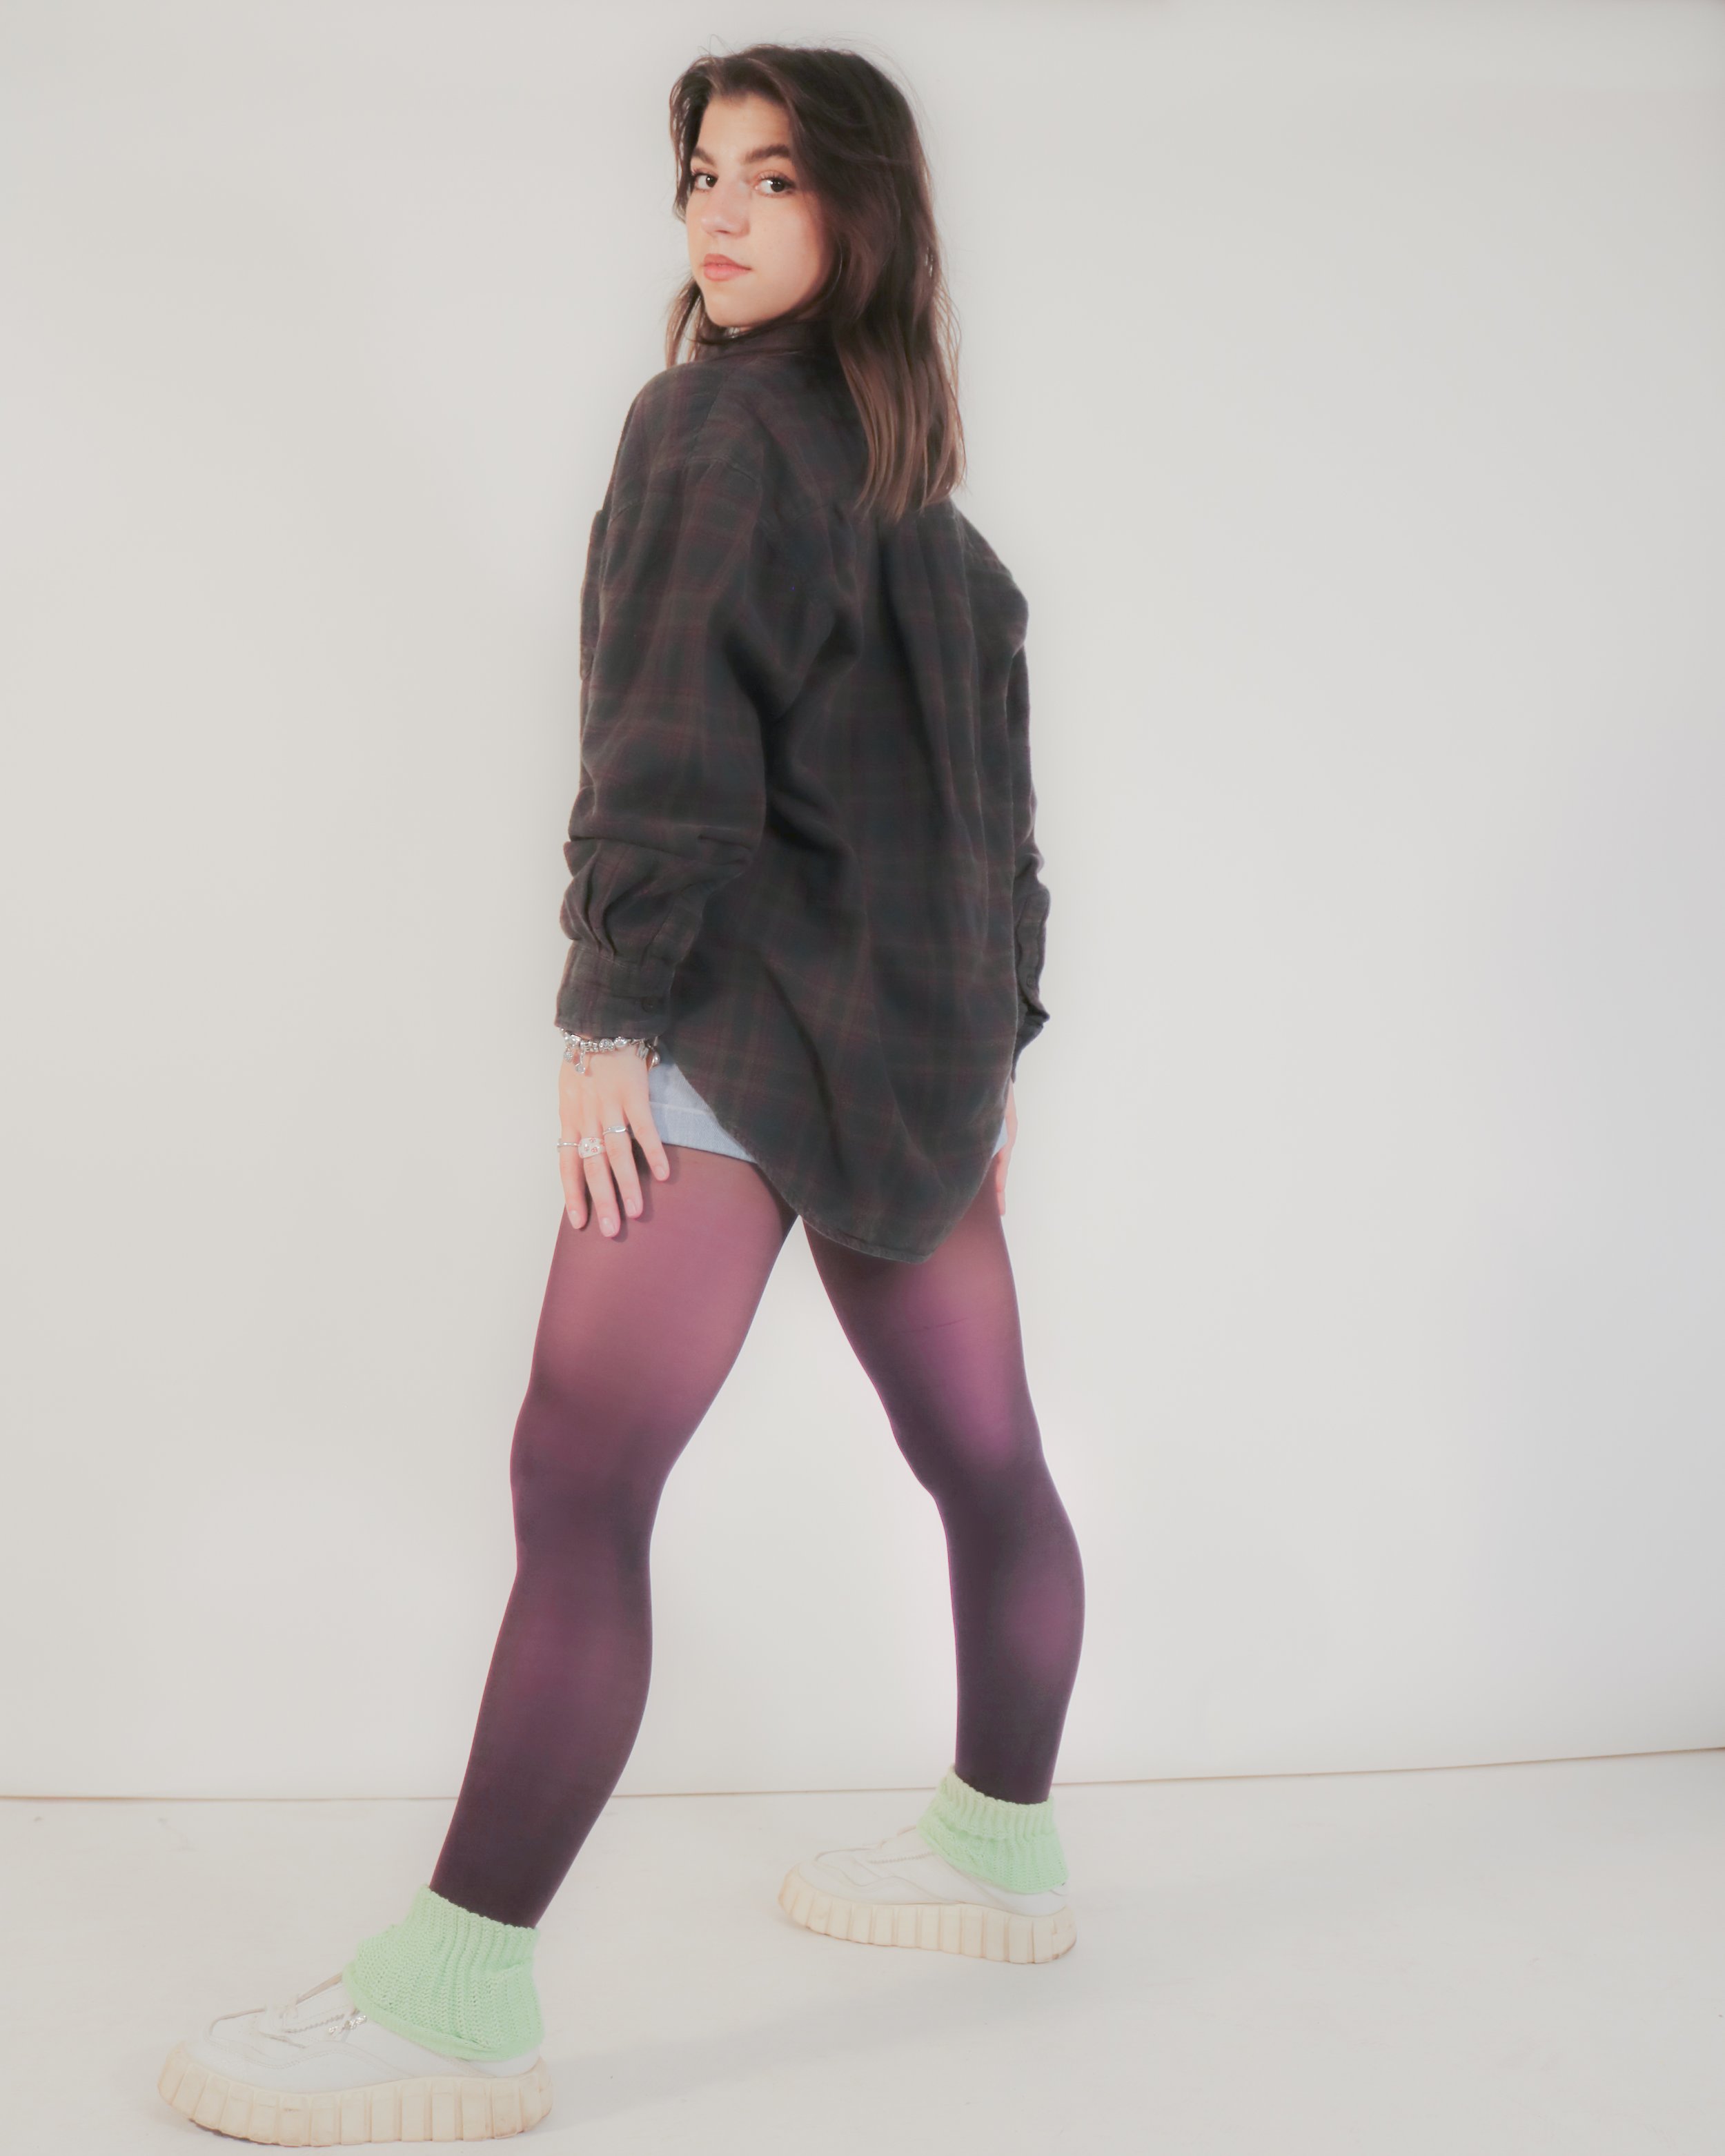 tights10-5 CROPPED-34.jpg